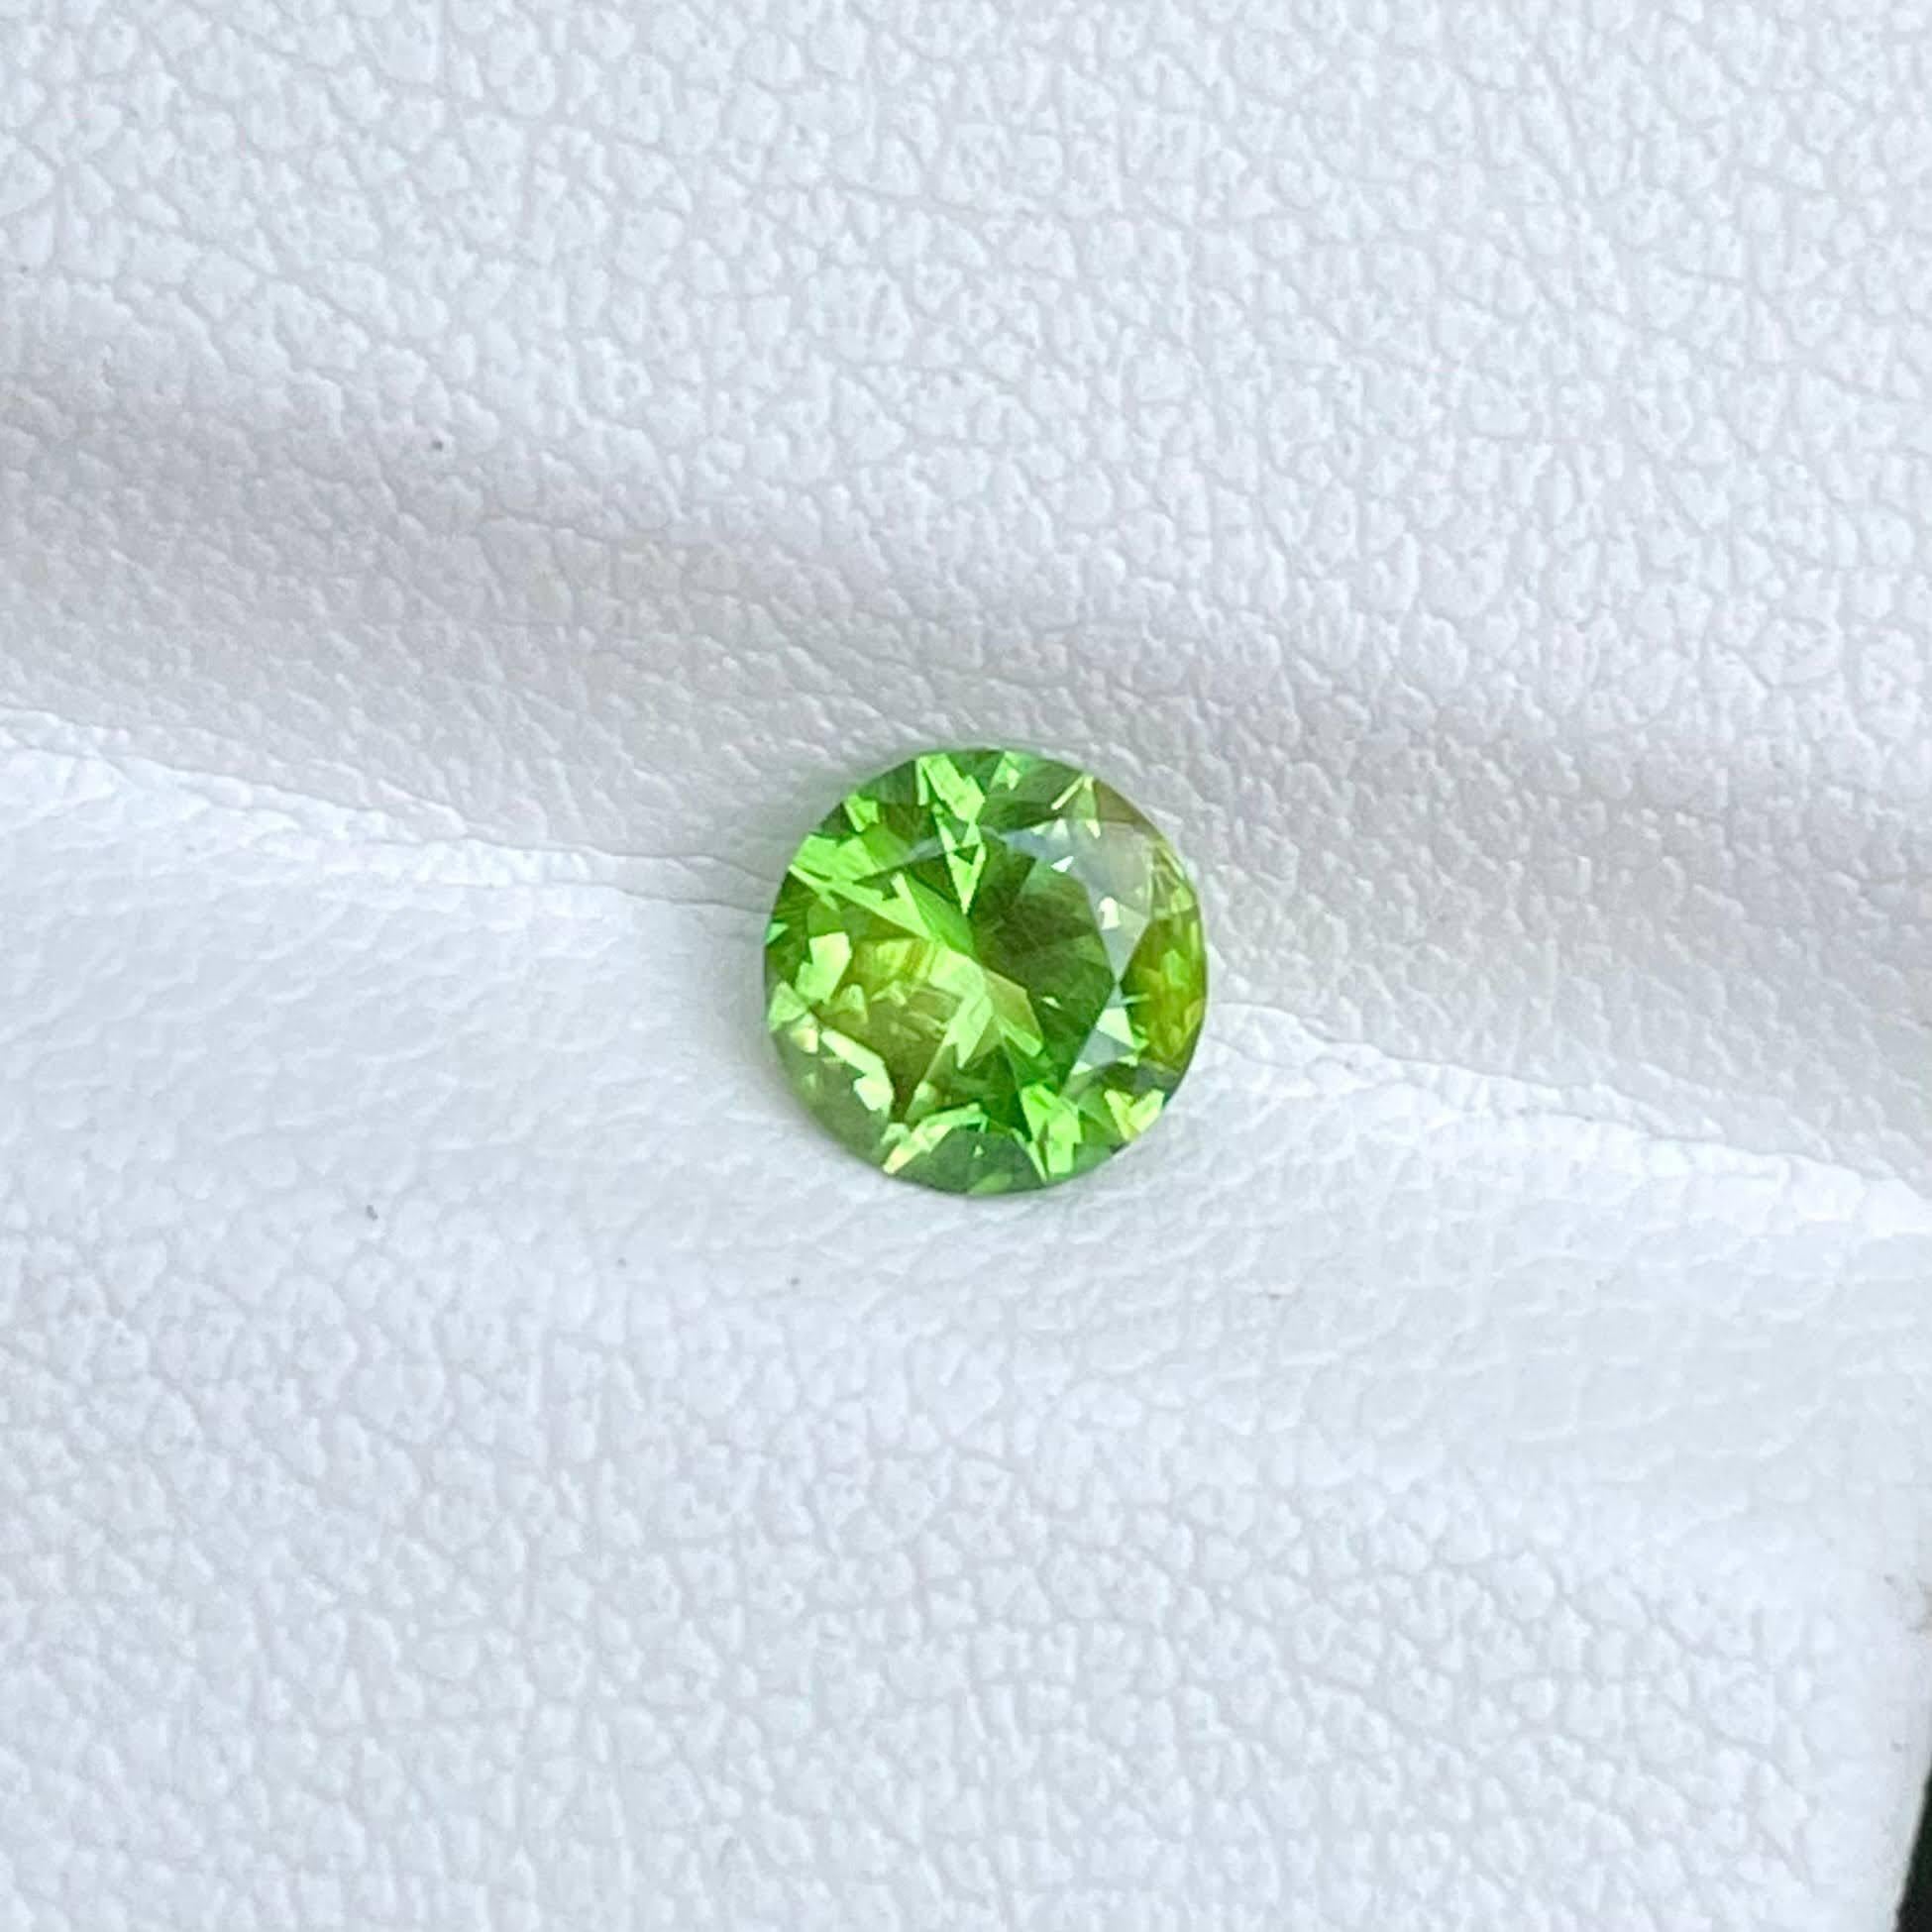 Weight 0.62 carats 
Dim 5.38x3.11 mm
Clarity VVS
Origin Russia
Treatment None
Shape Round
Cut Round Brilliant





The 0.62 carat Demantoid Garnet stone showcases the exquisite beauty of Russian gemstones with its Round Cut, revealing a mesmerizing